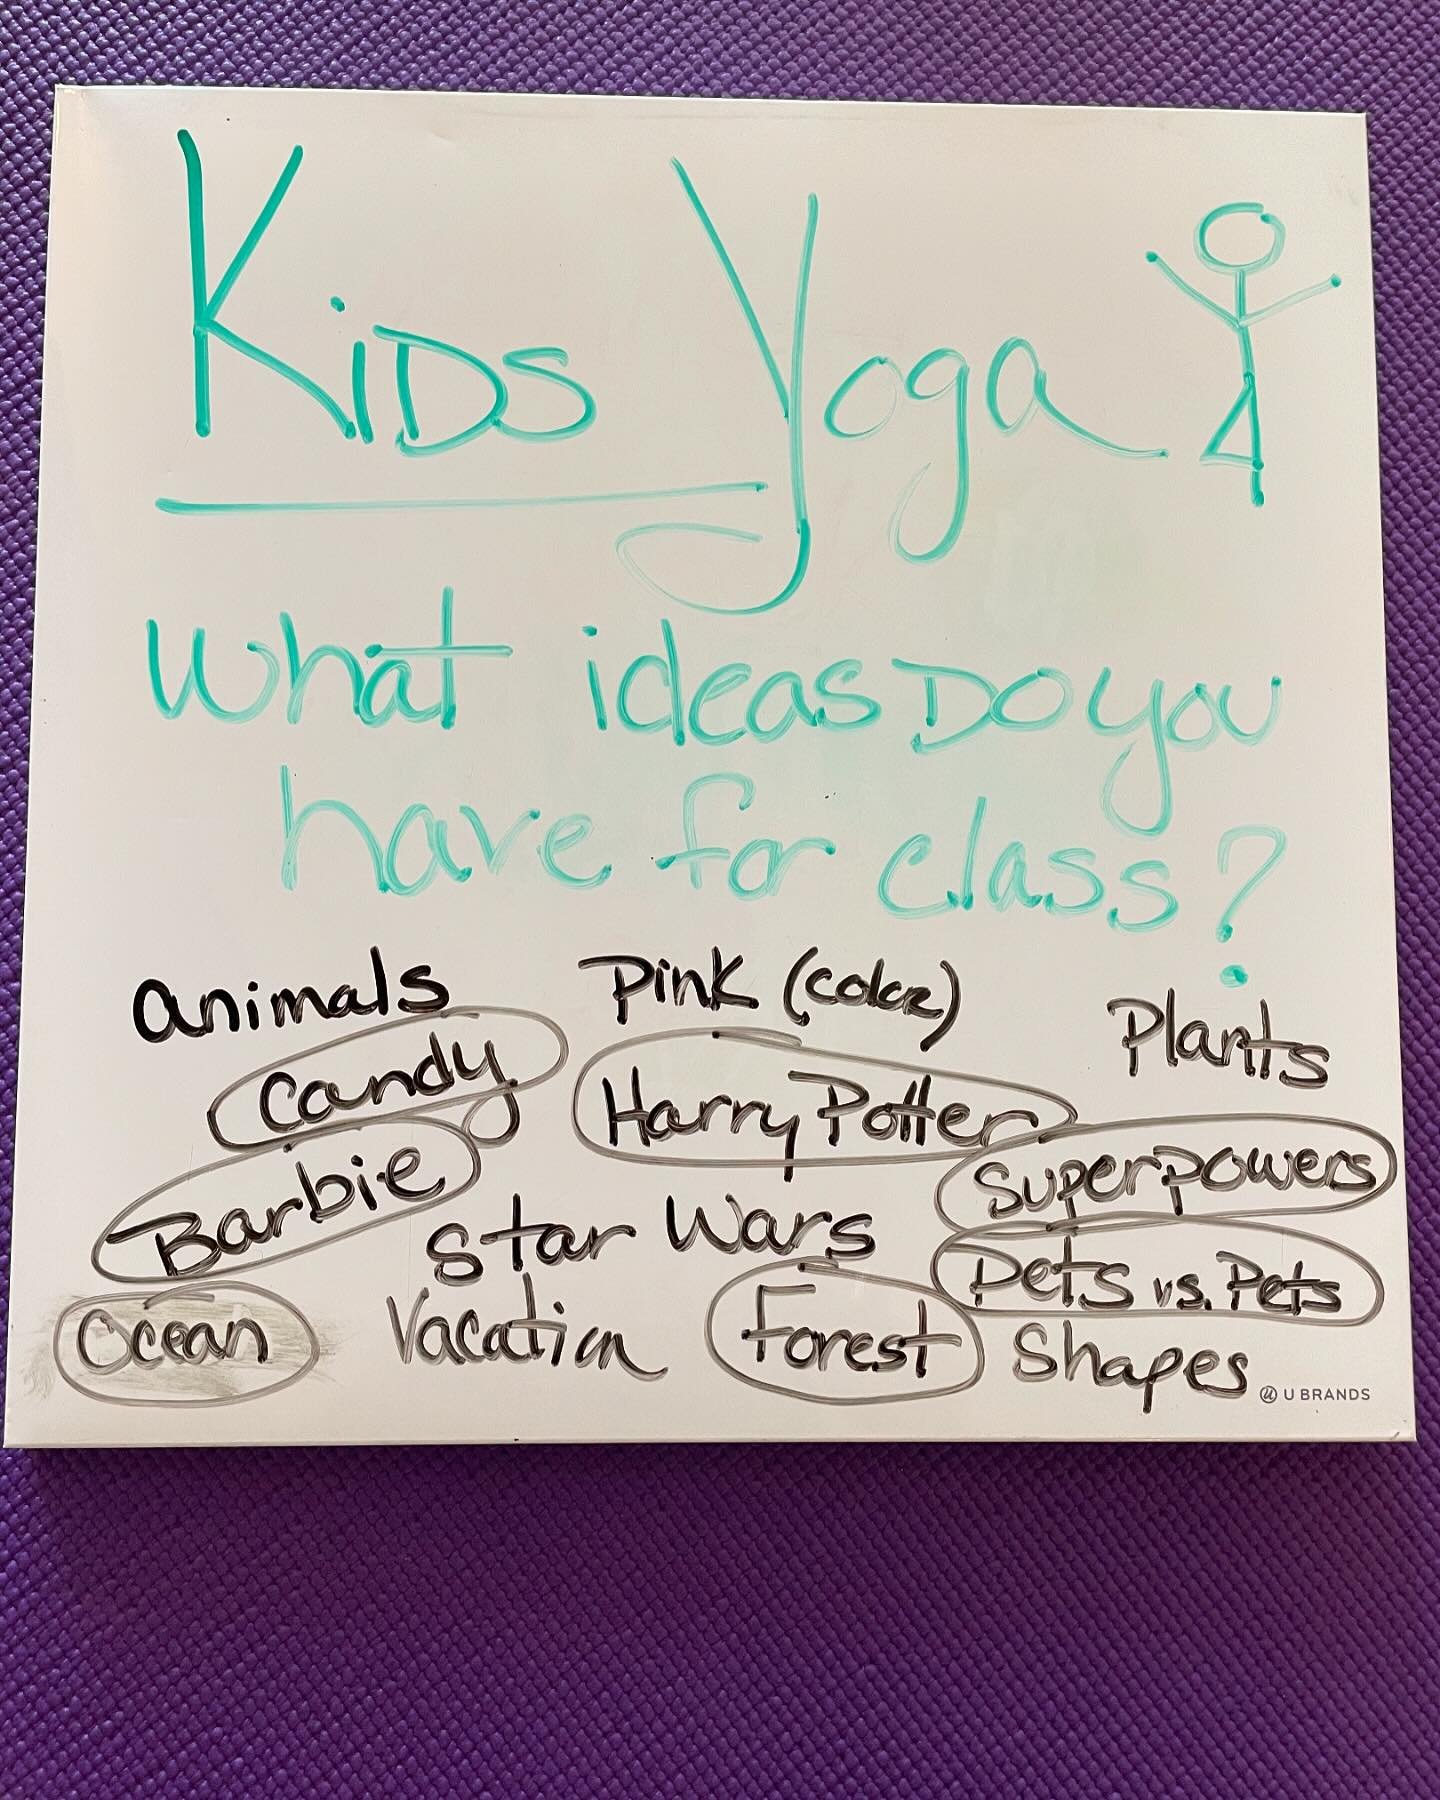 Getting kids ideas for class themes is always a fun one! You never know what they come up with! Having them help plan upcoming classes gives them a strong sense of community &amp; empowers them to share ideas &amp; work together! They are excited abo